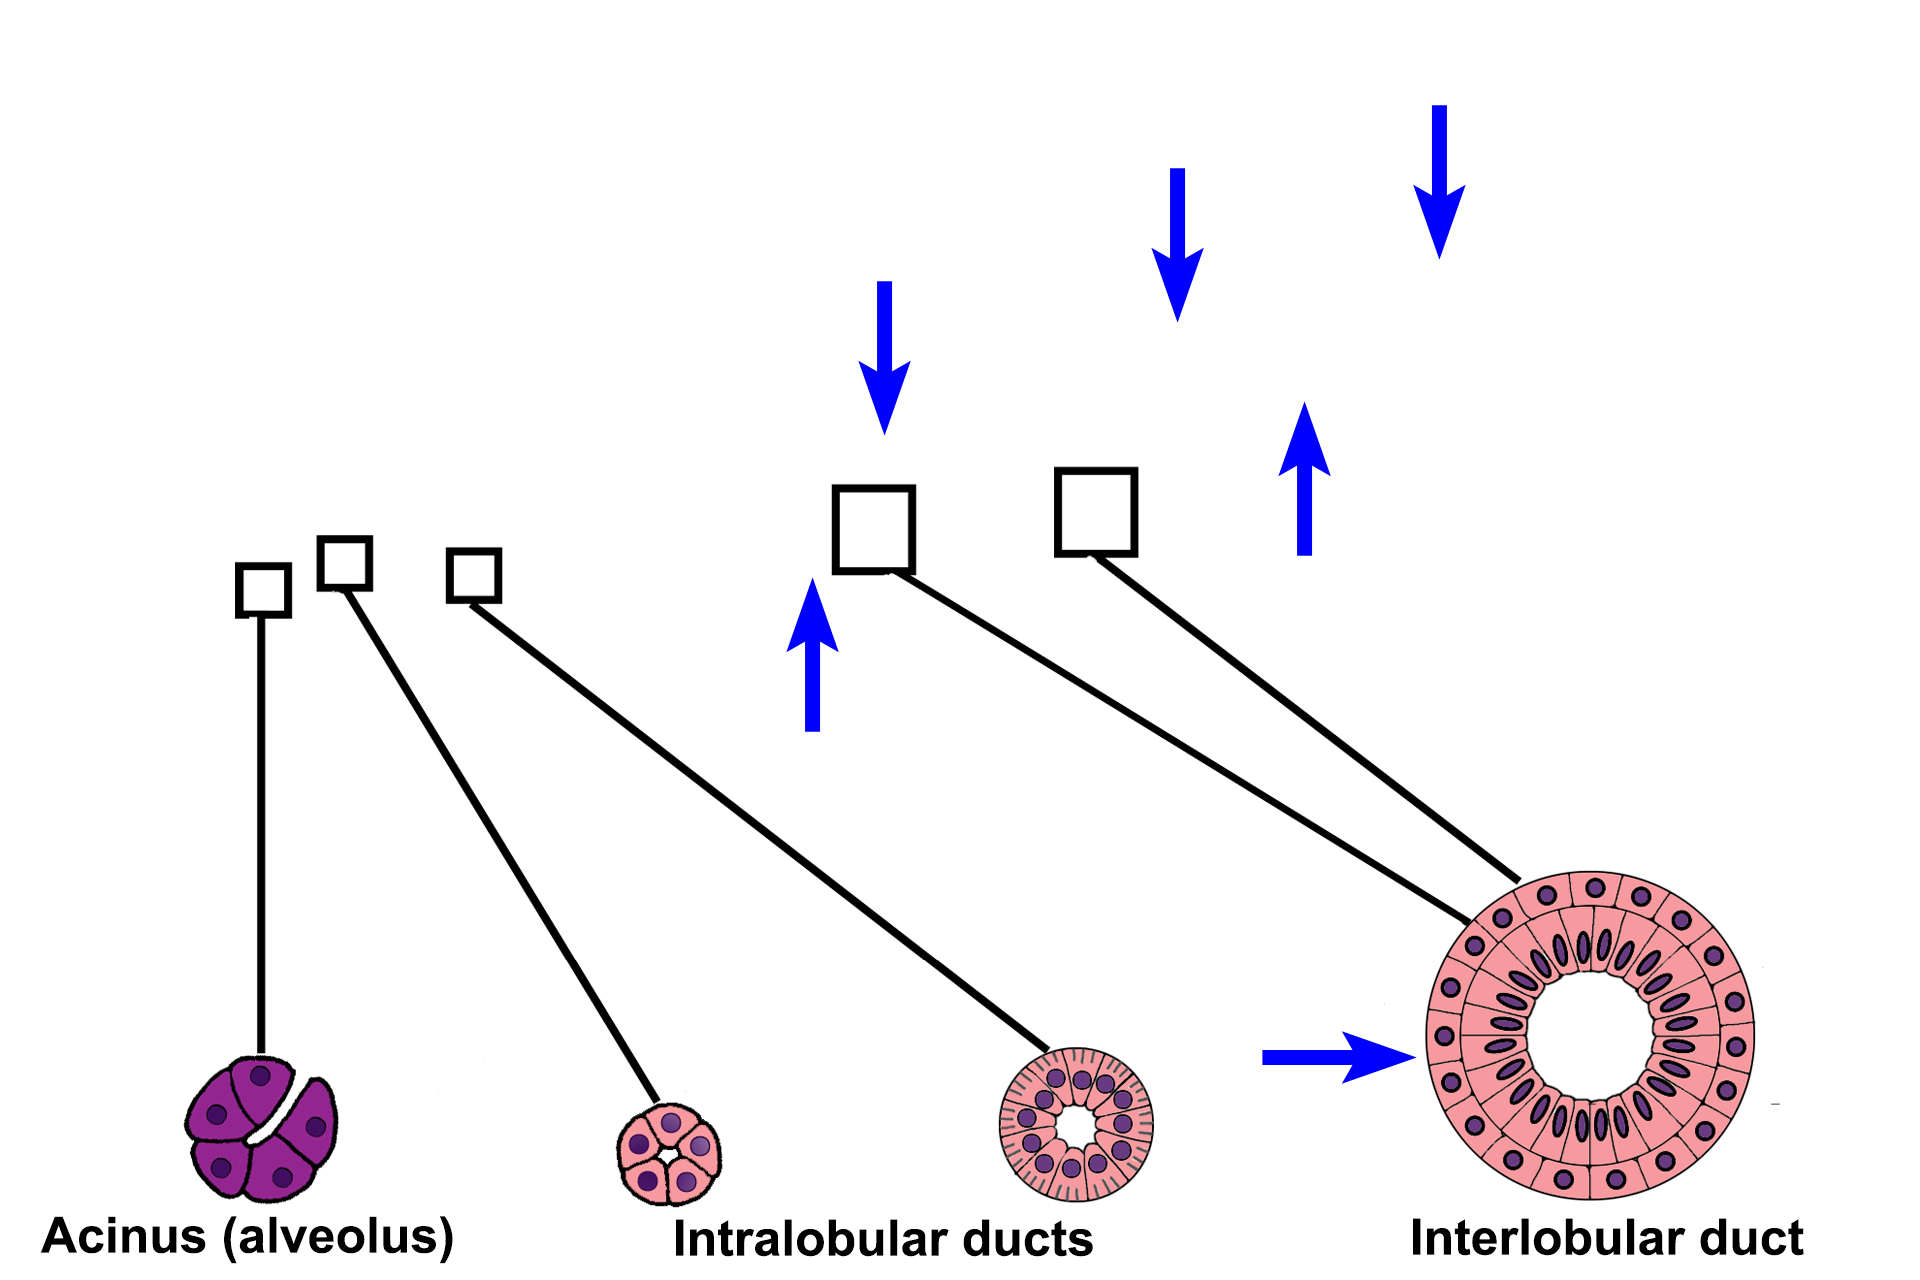 Interlobular ducts > <p>Interlobular ducts are formed by the convergence of intralobular ducts and they lie in the interlobular connective tissue between lobules.  Interlobular ducts are lined by stratified epithelium and anastomose with ducts from other lobules to form the main duct.</p>
